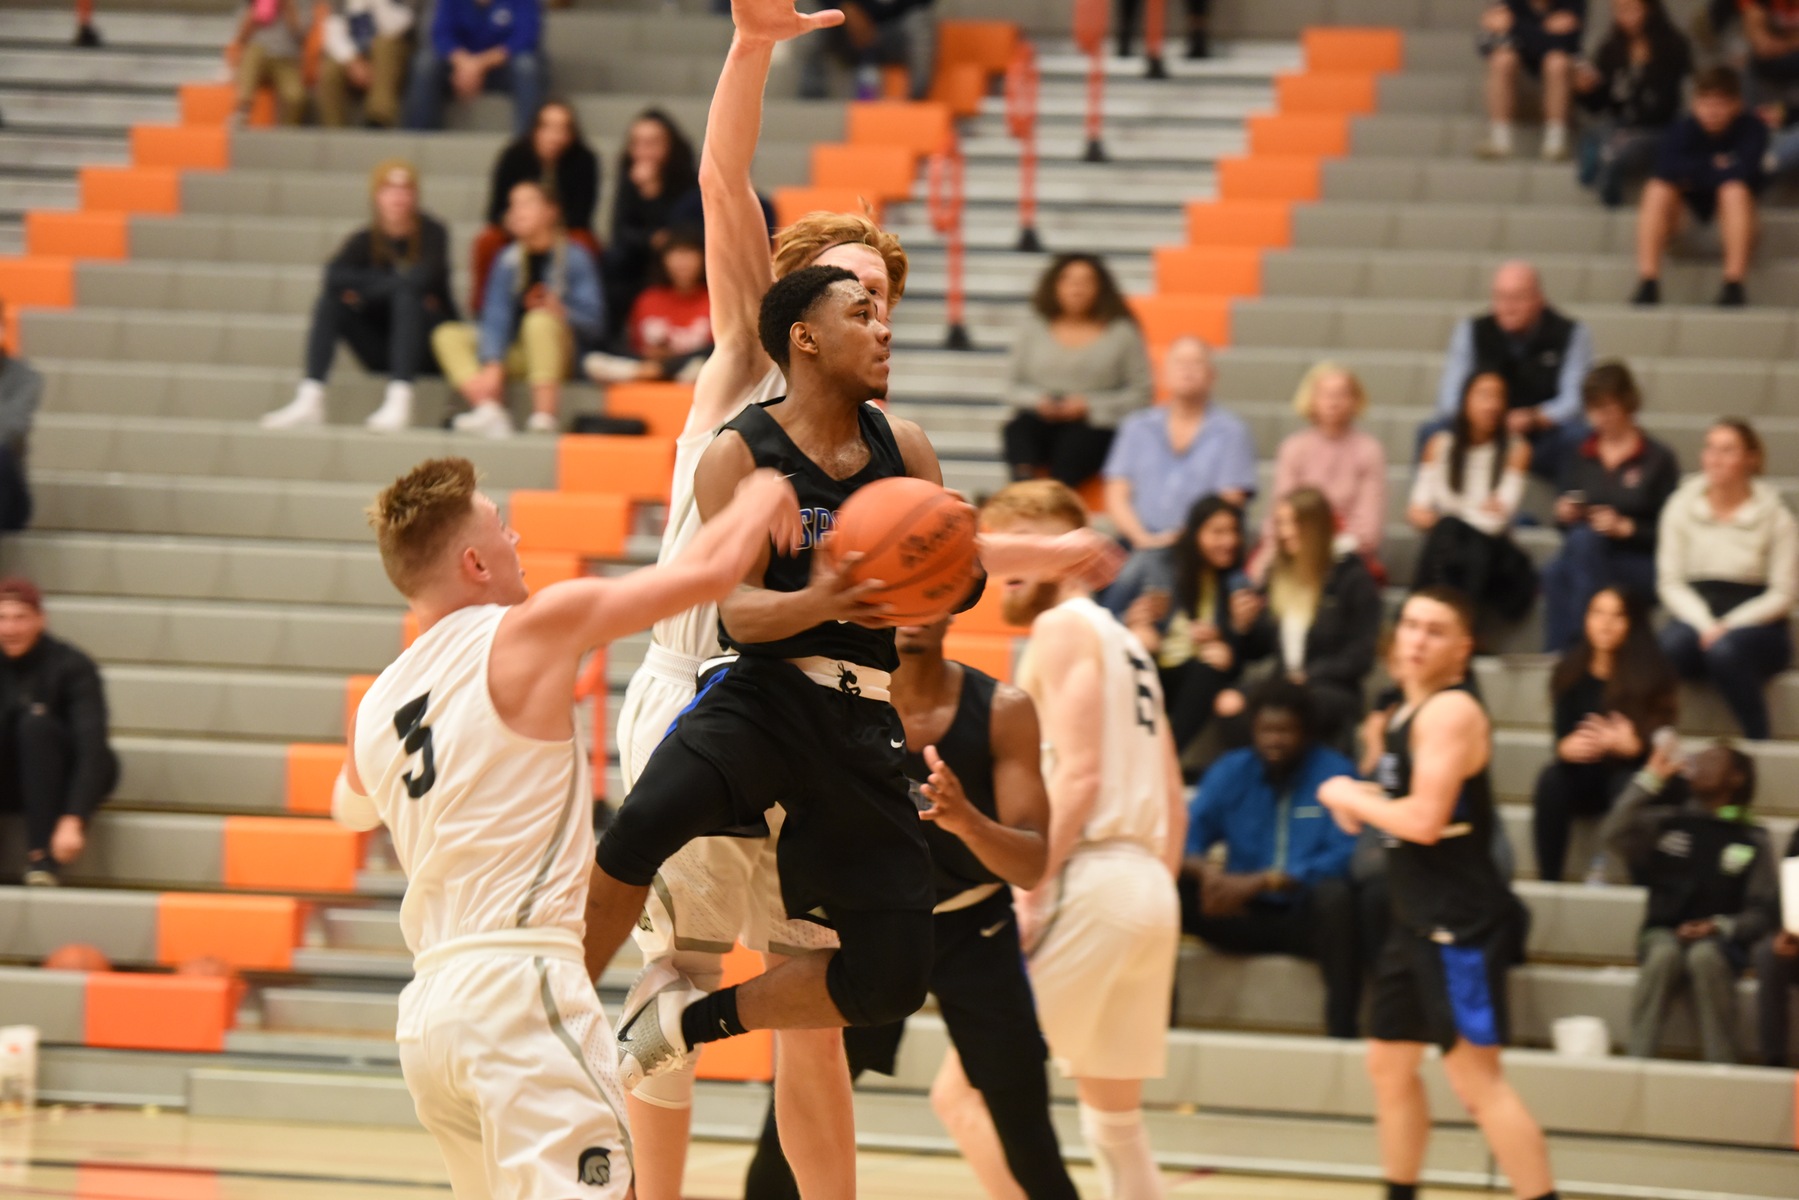 Men's Basketball Goes 2-1 in NWAC Crossover